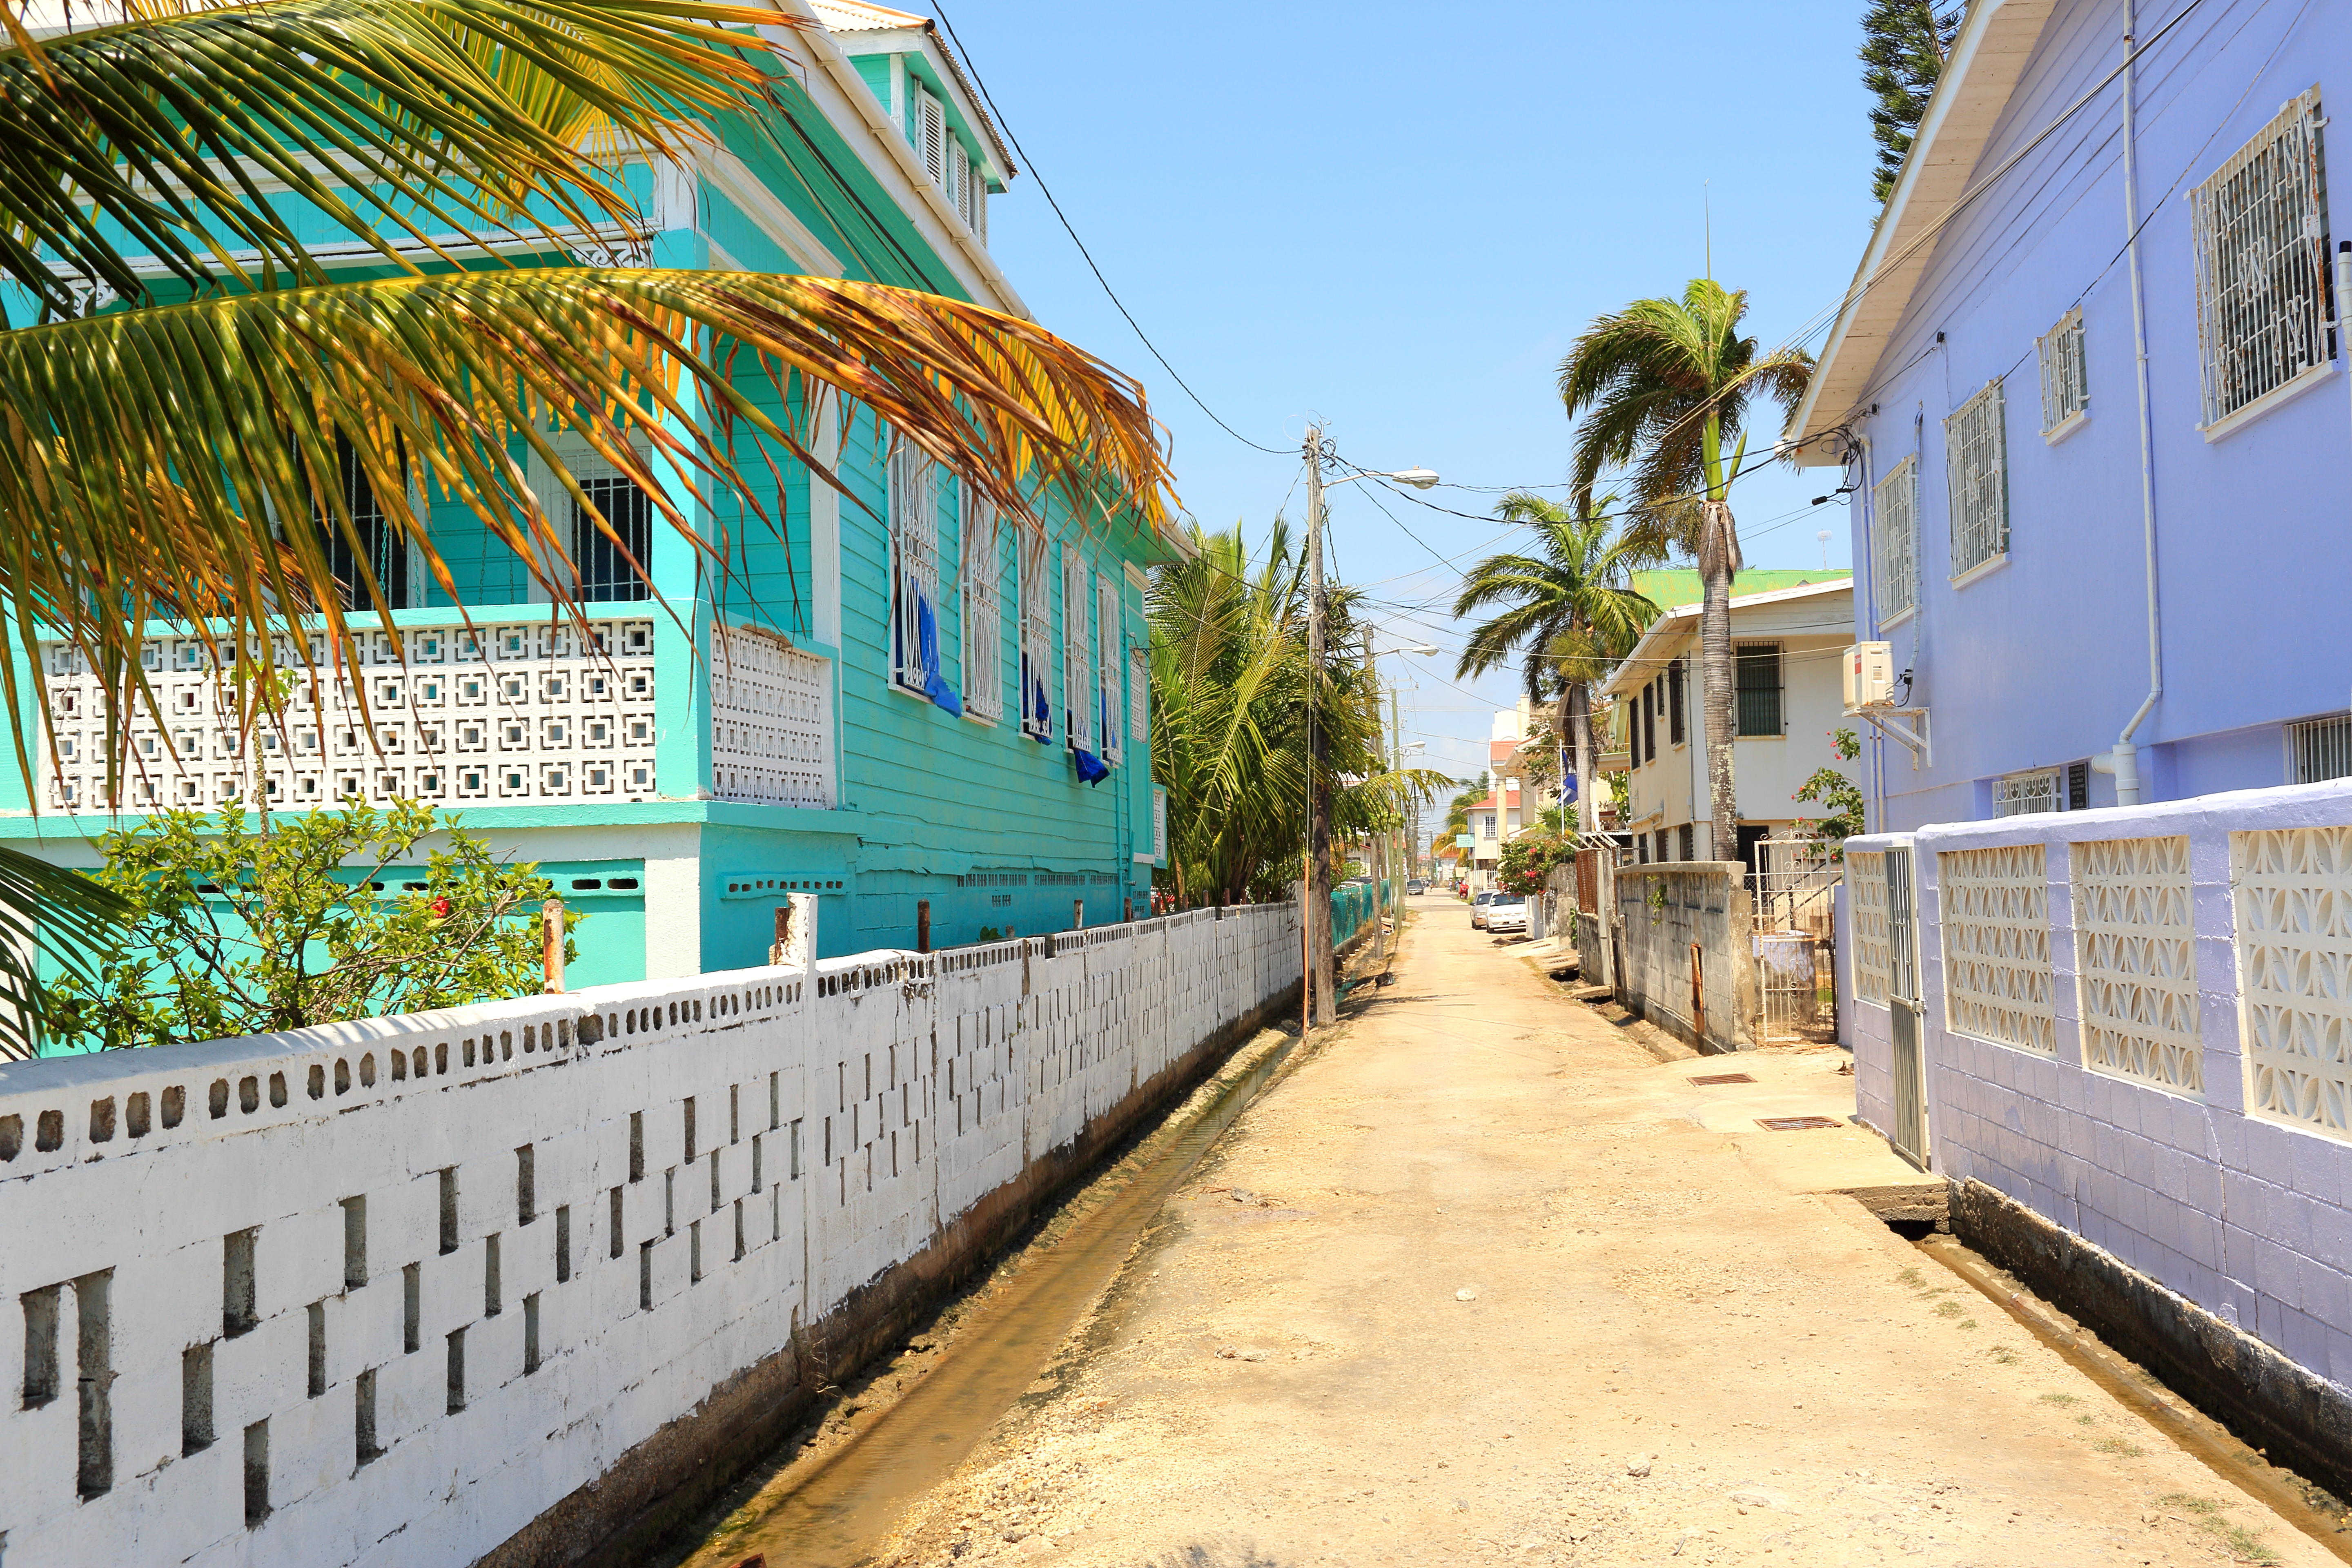 Flight Deal: Fly From Texas To Belize For Only $271